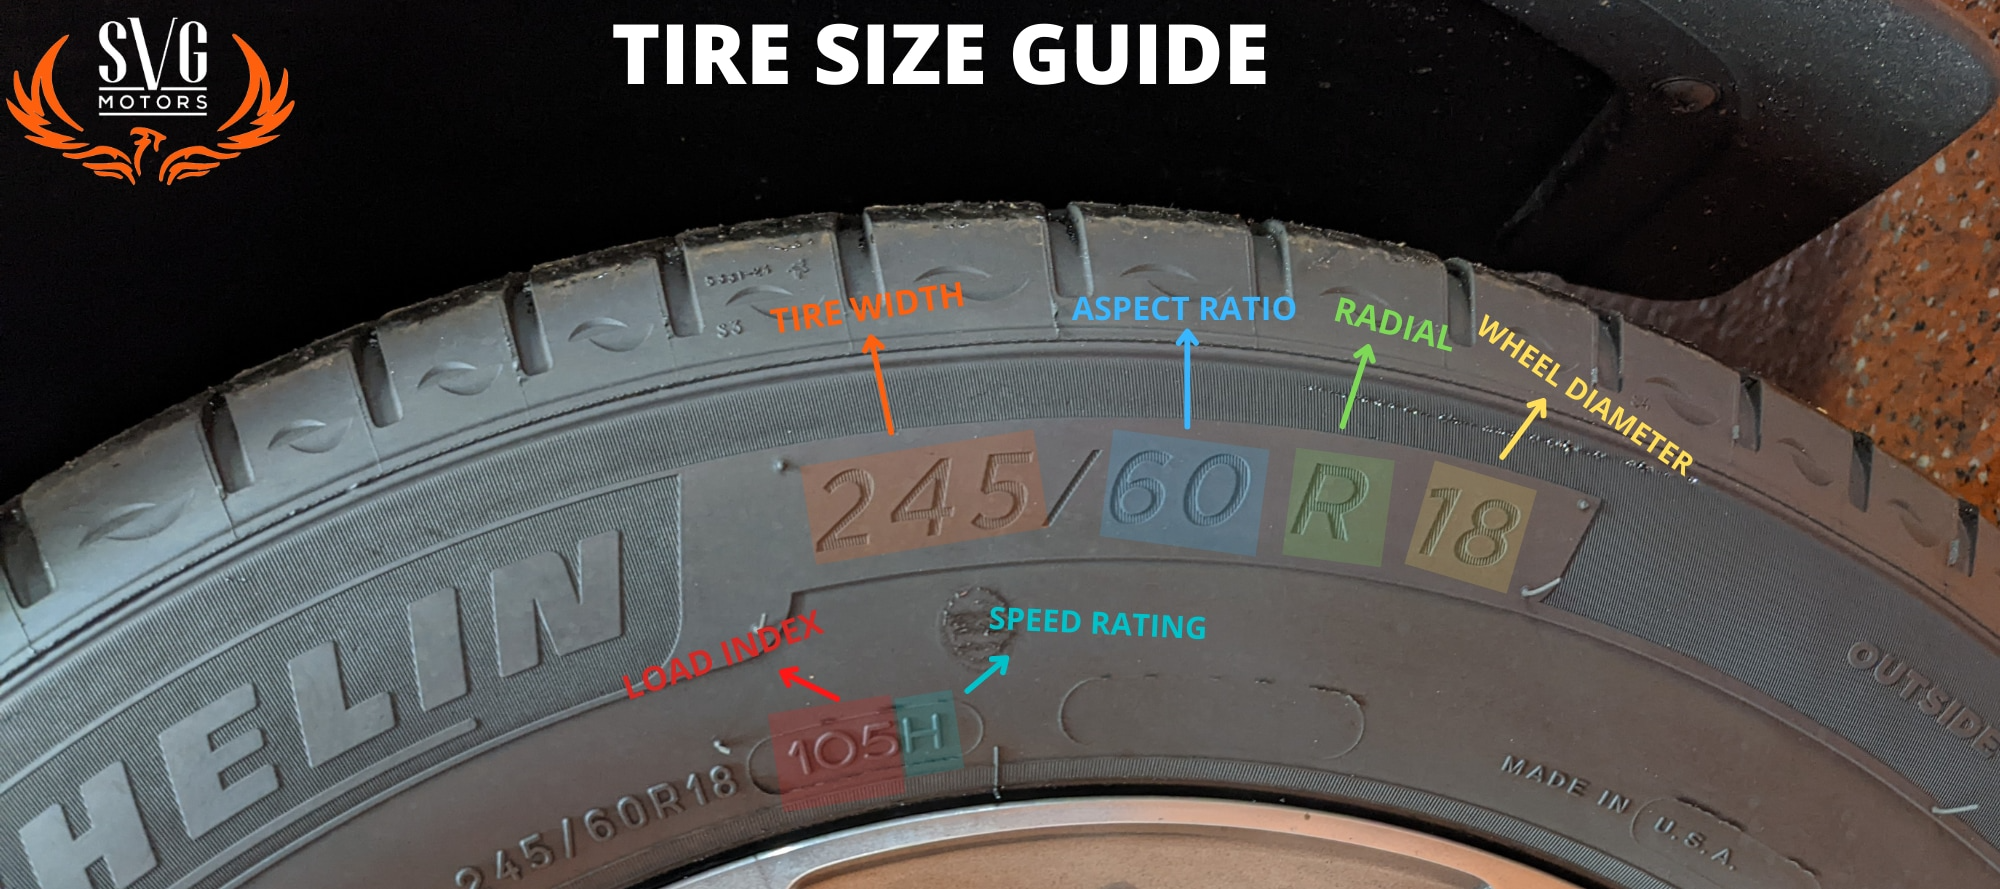 SVG Tire Size Guide